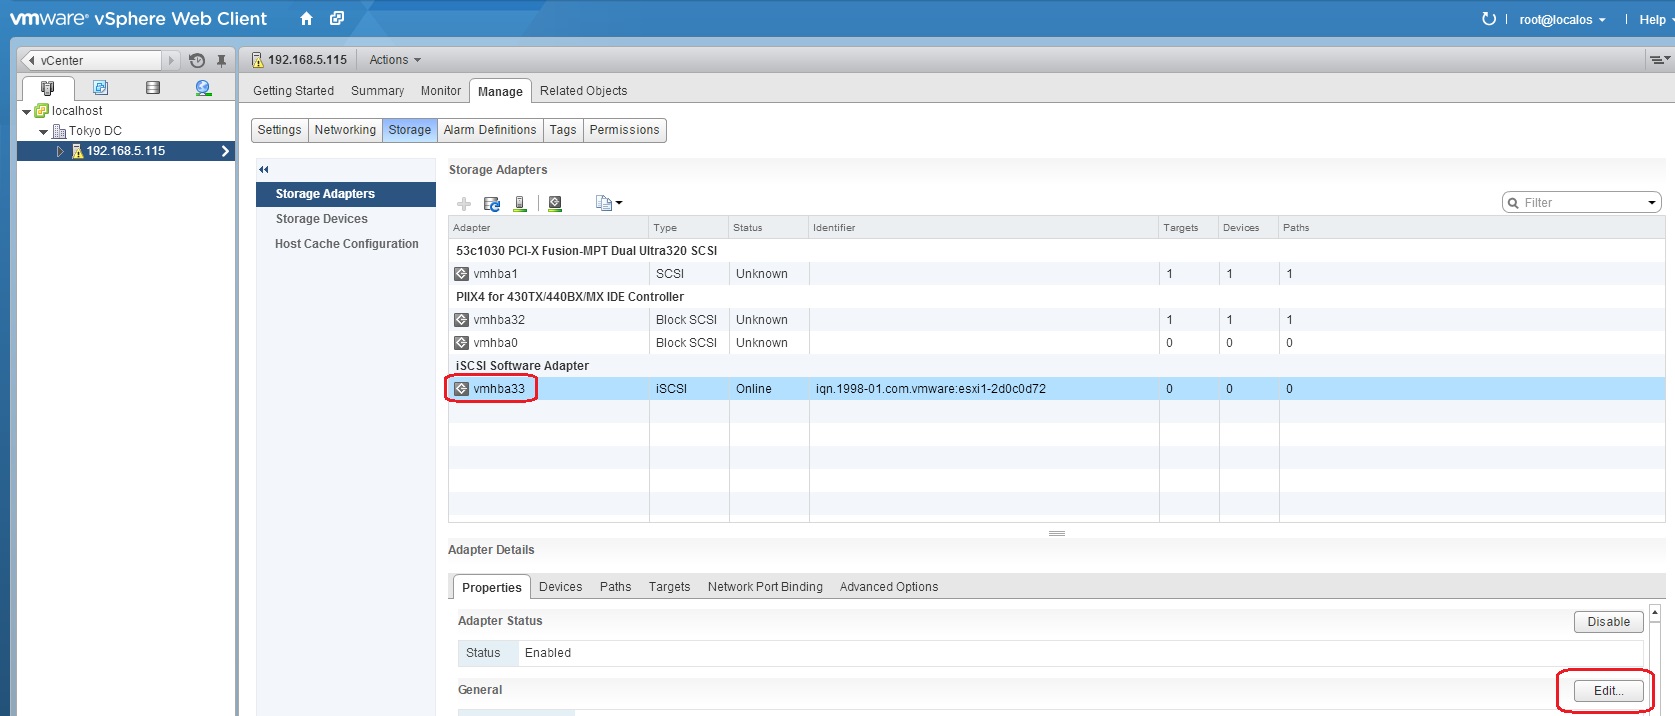 how to enable dcui on vmware esxi 6.7